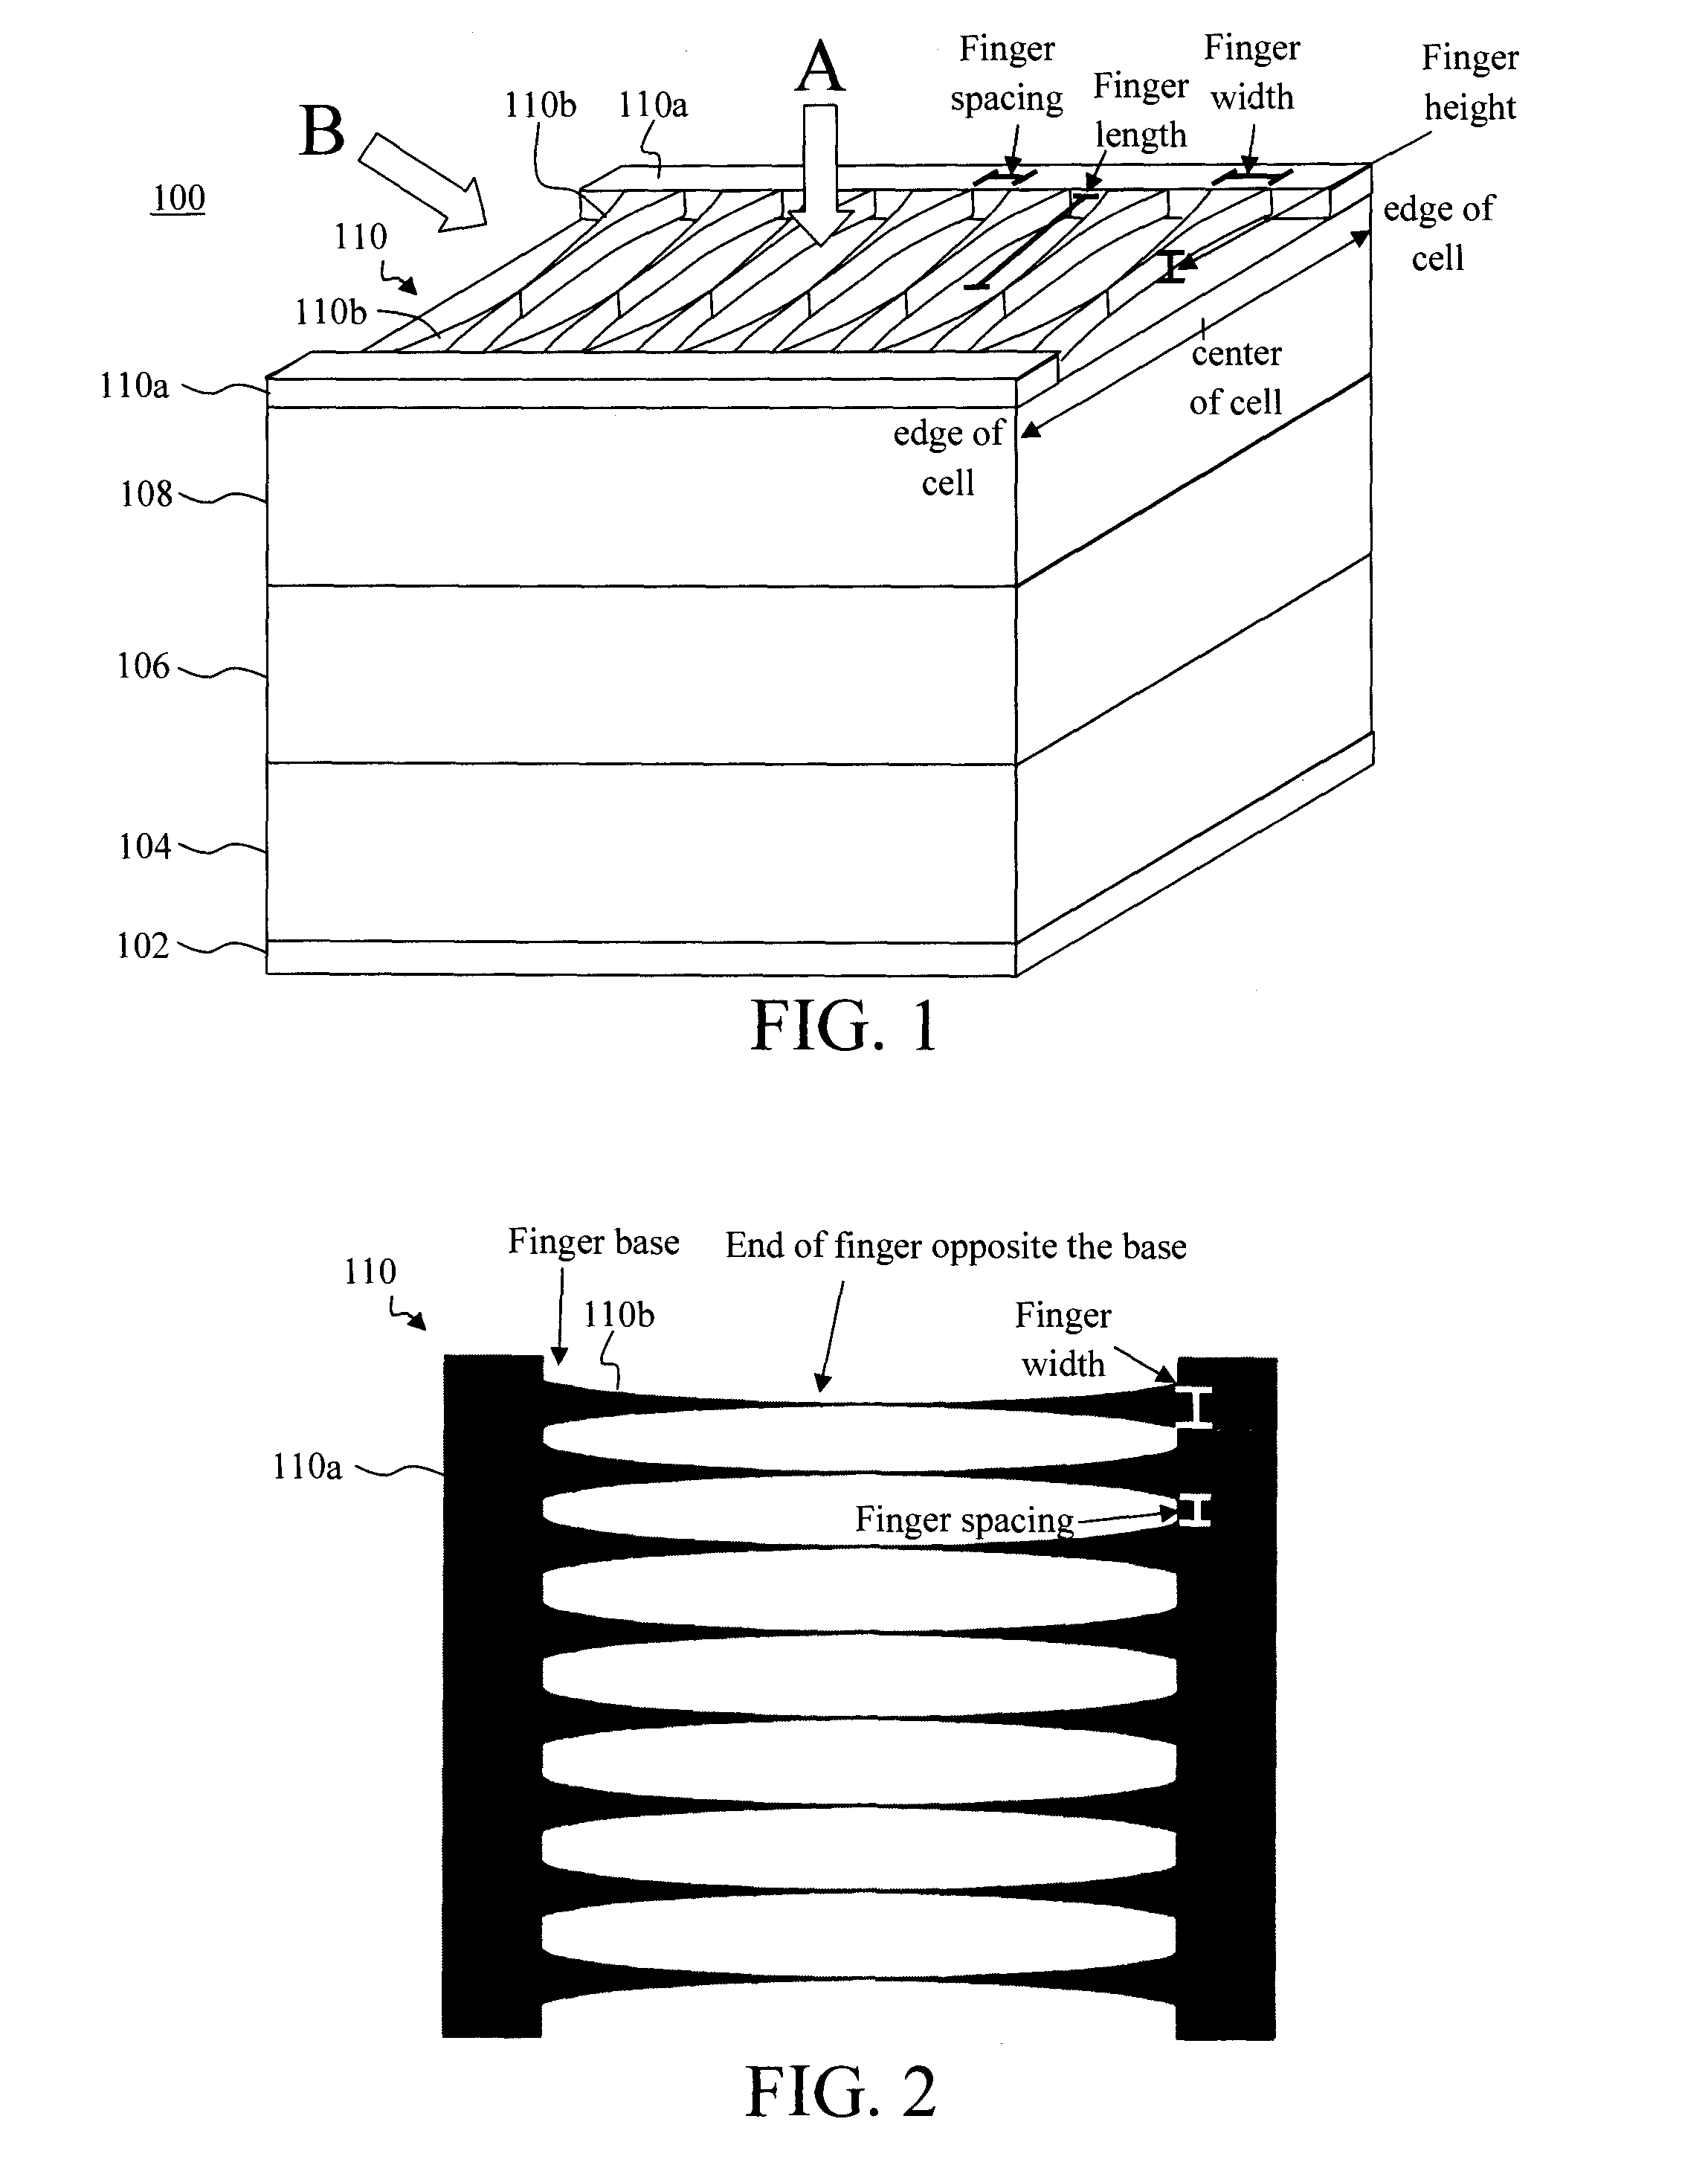 Optimized Grid Design for Concentrator Solar Cell